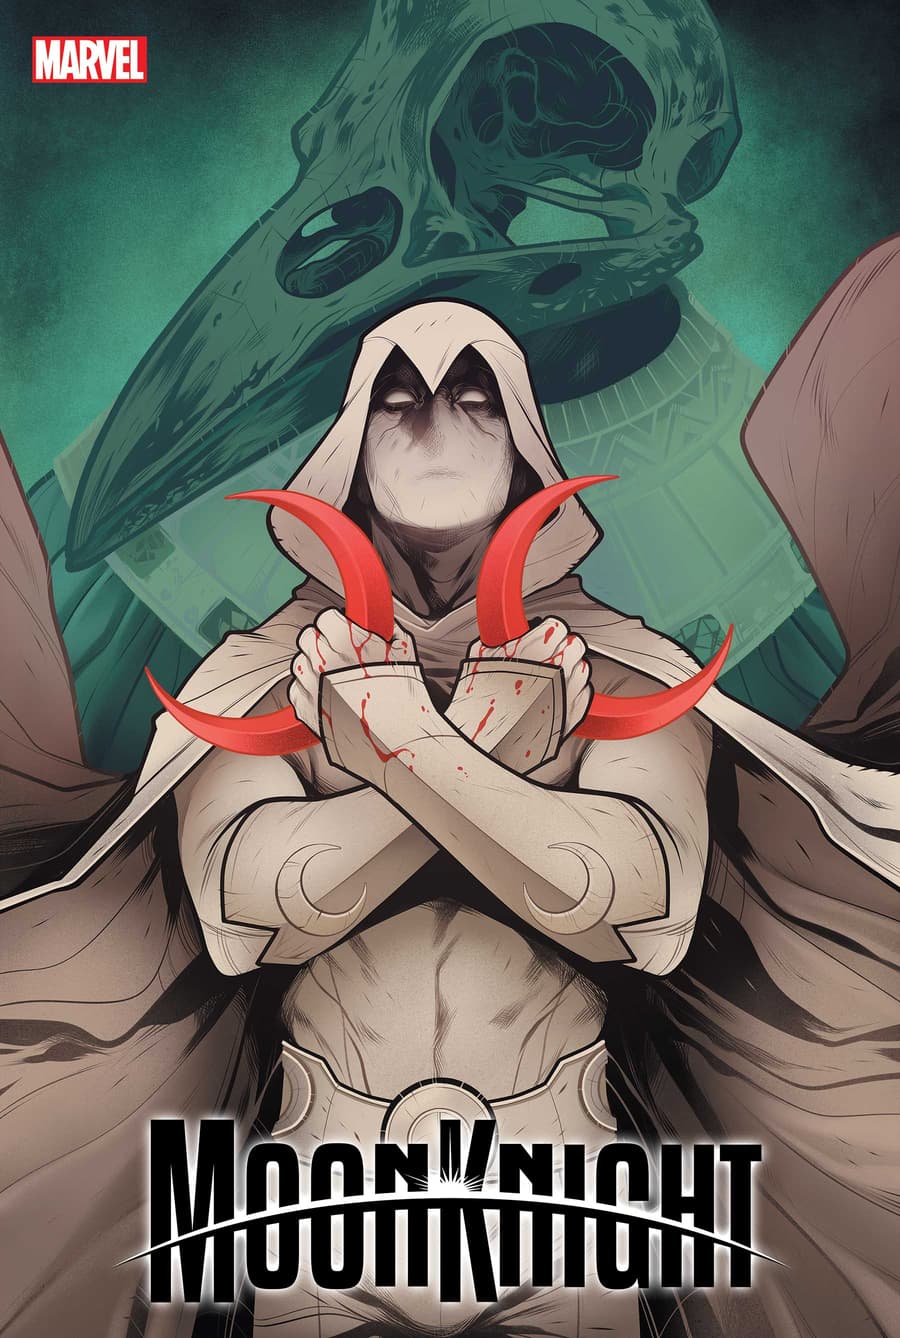 MOON KNIGHT #1 variant cover by Elizabeth Torque